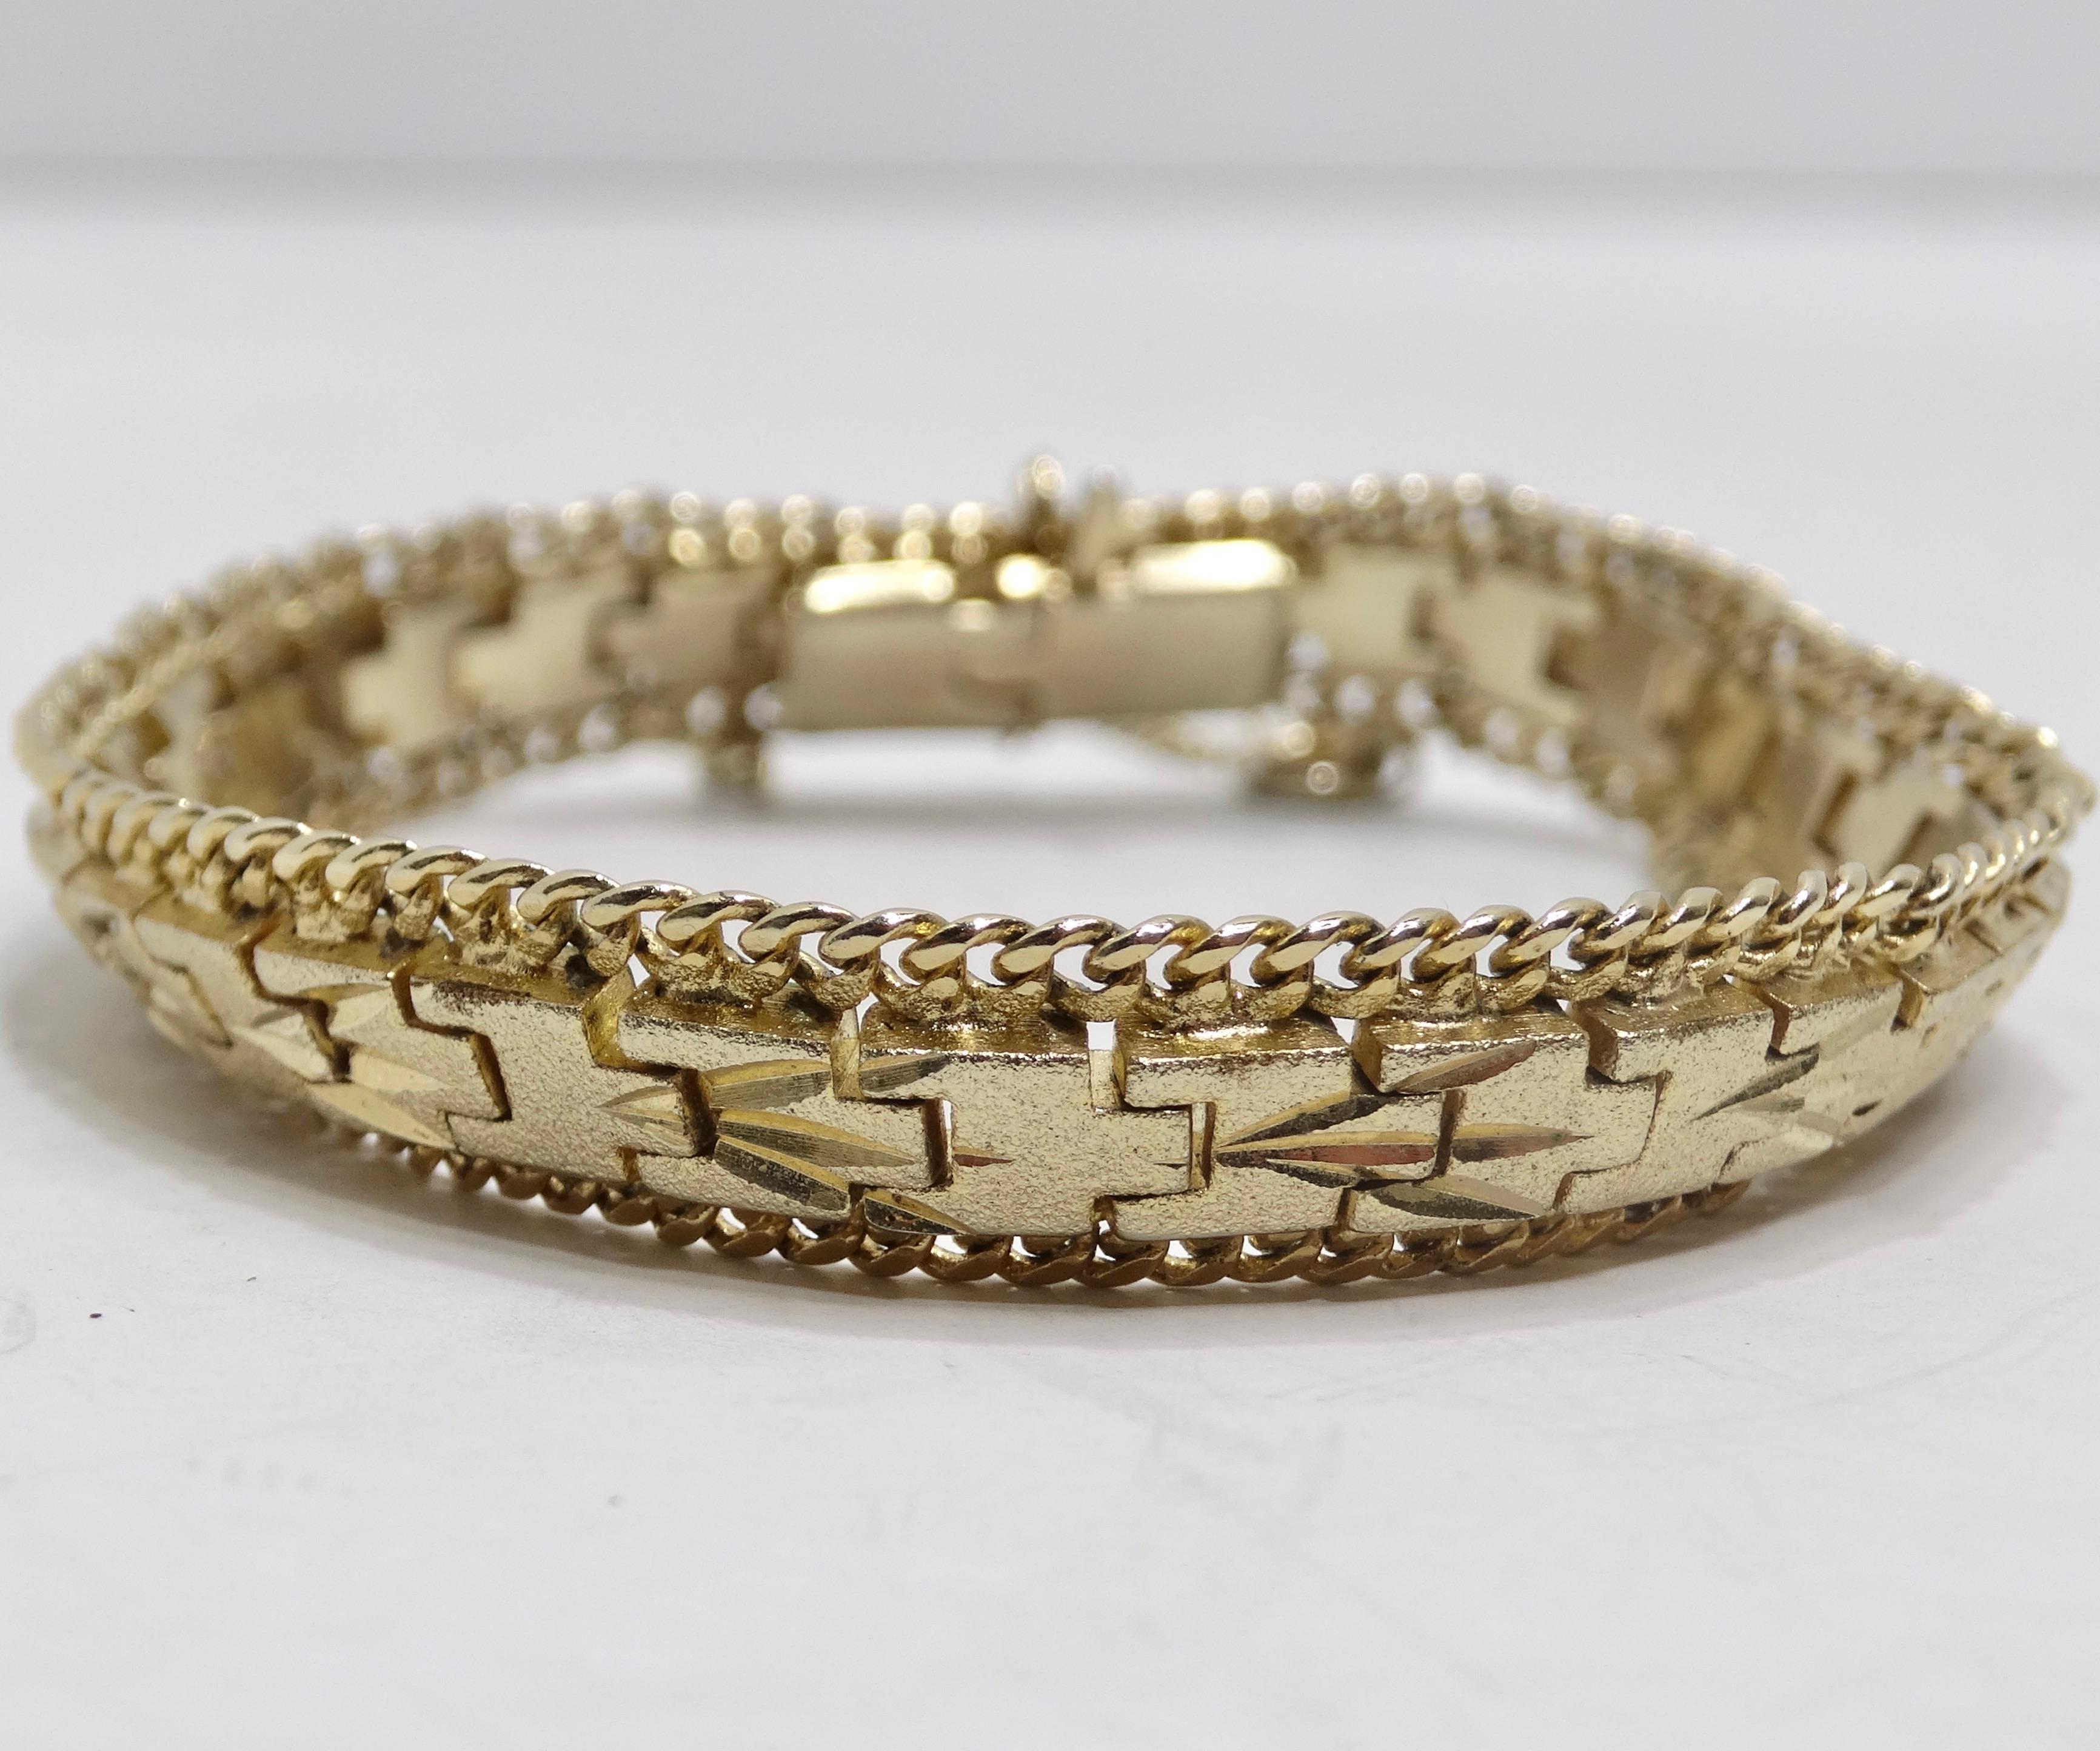 Introducing a bracelet that transcends the ordinary, embodying the essence of timeless luxury - the 24K Gold Plated 1960s Chain Bracelet. This beautiful bracelet features a unique link motif with subtle gold-tone chain trim encircling the border.